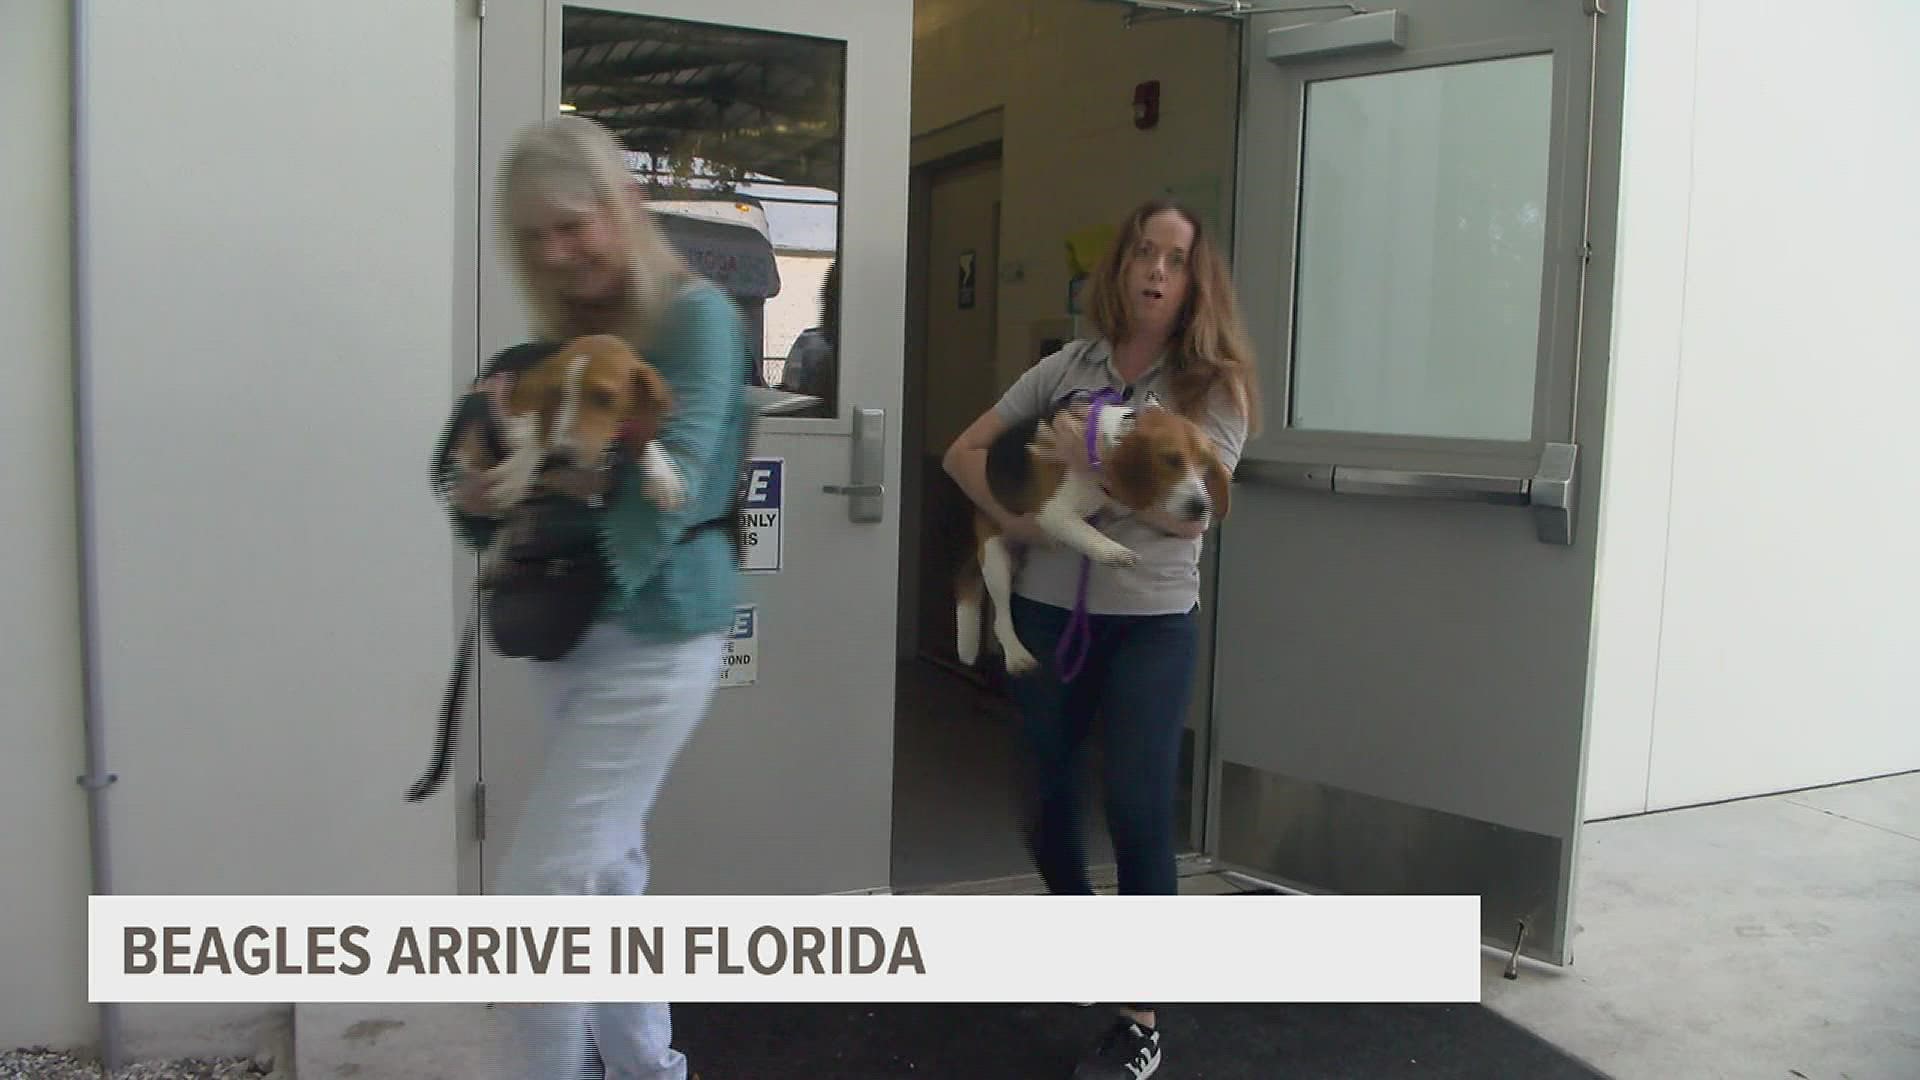 The Humane Society removed the last group of beagles from the Envigo facility, which bred dogs for labs that conduct tests on animals.